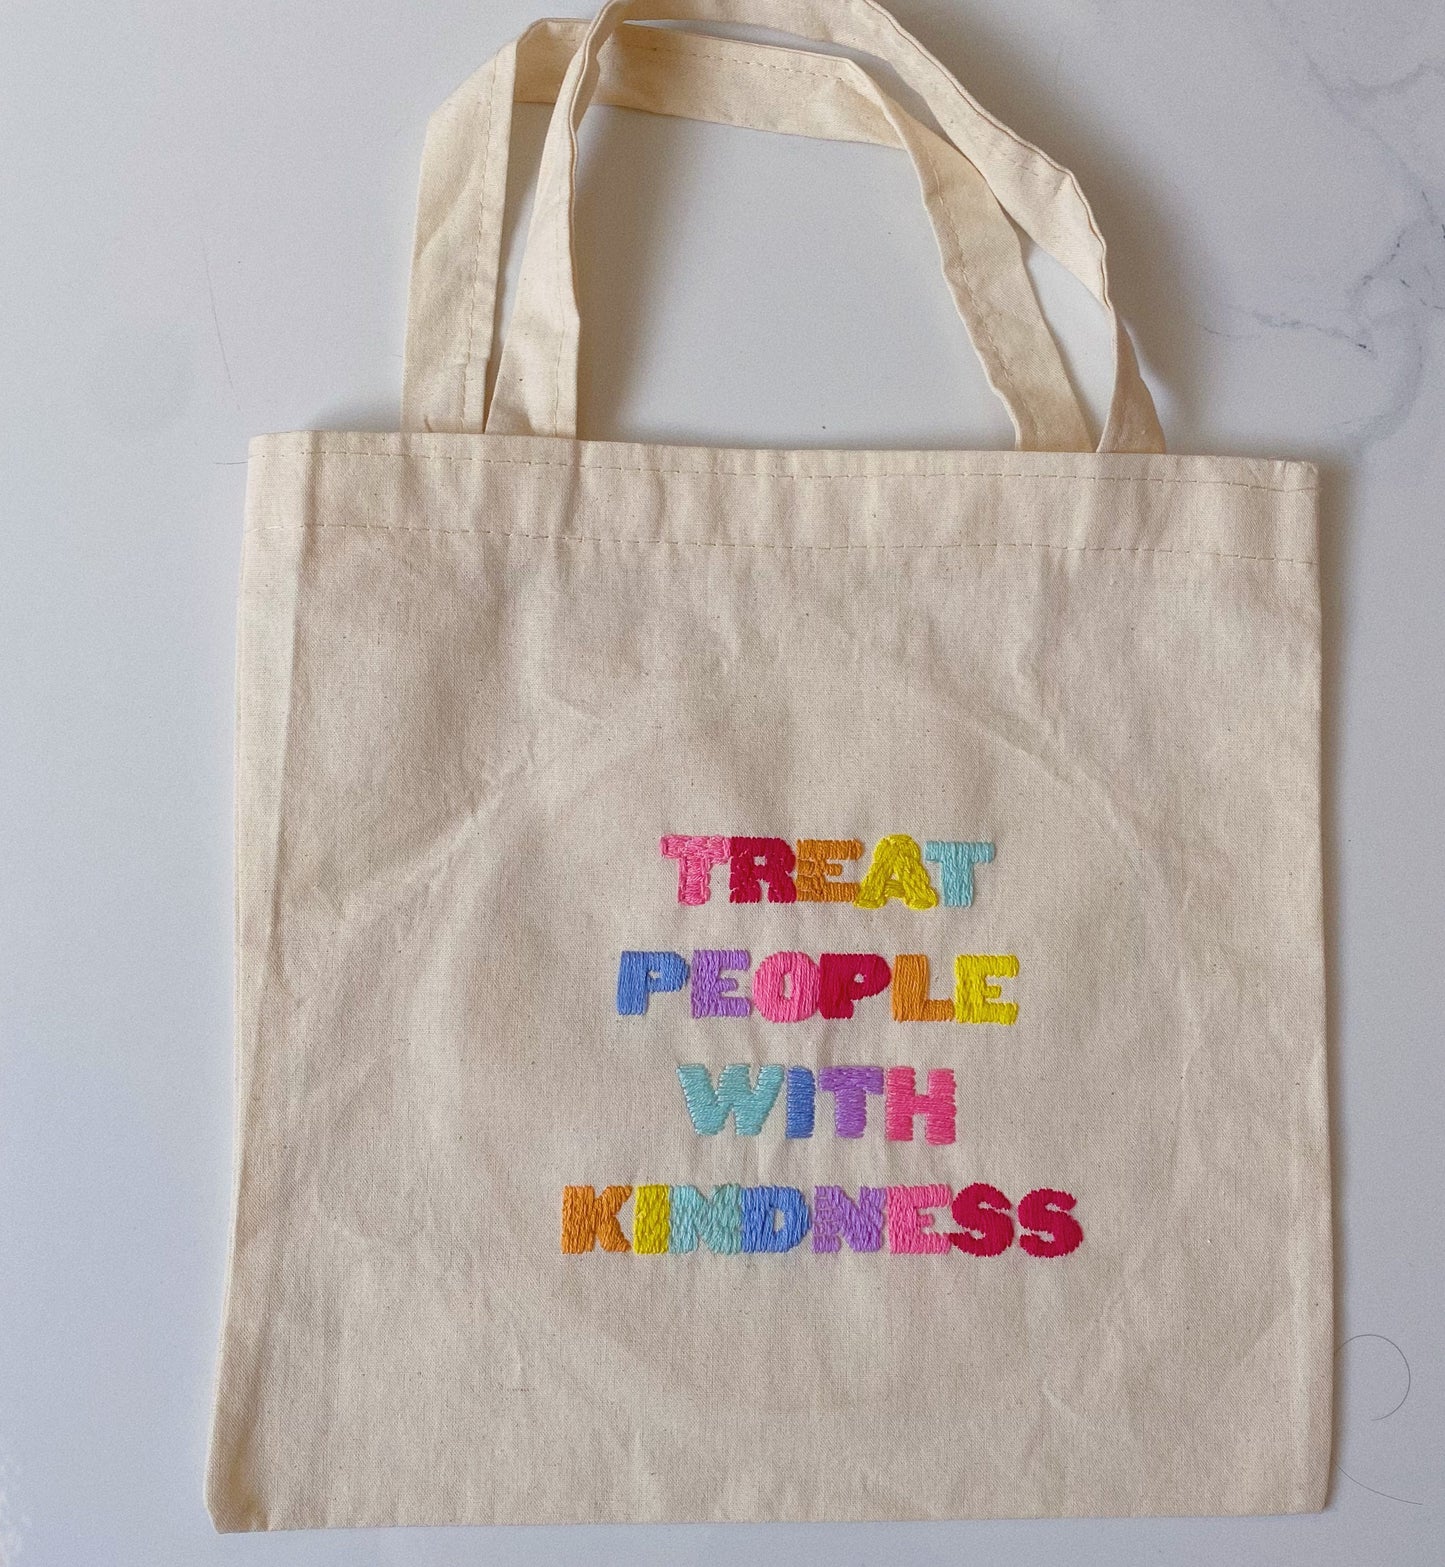 Tote Treat People With Kidness